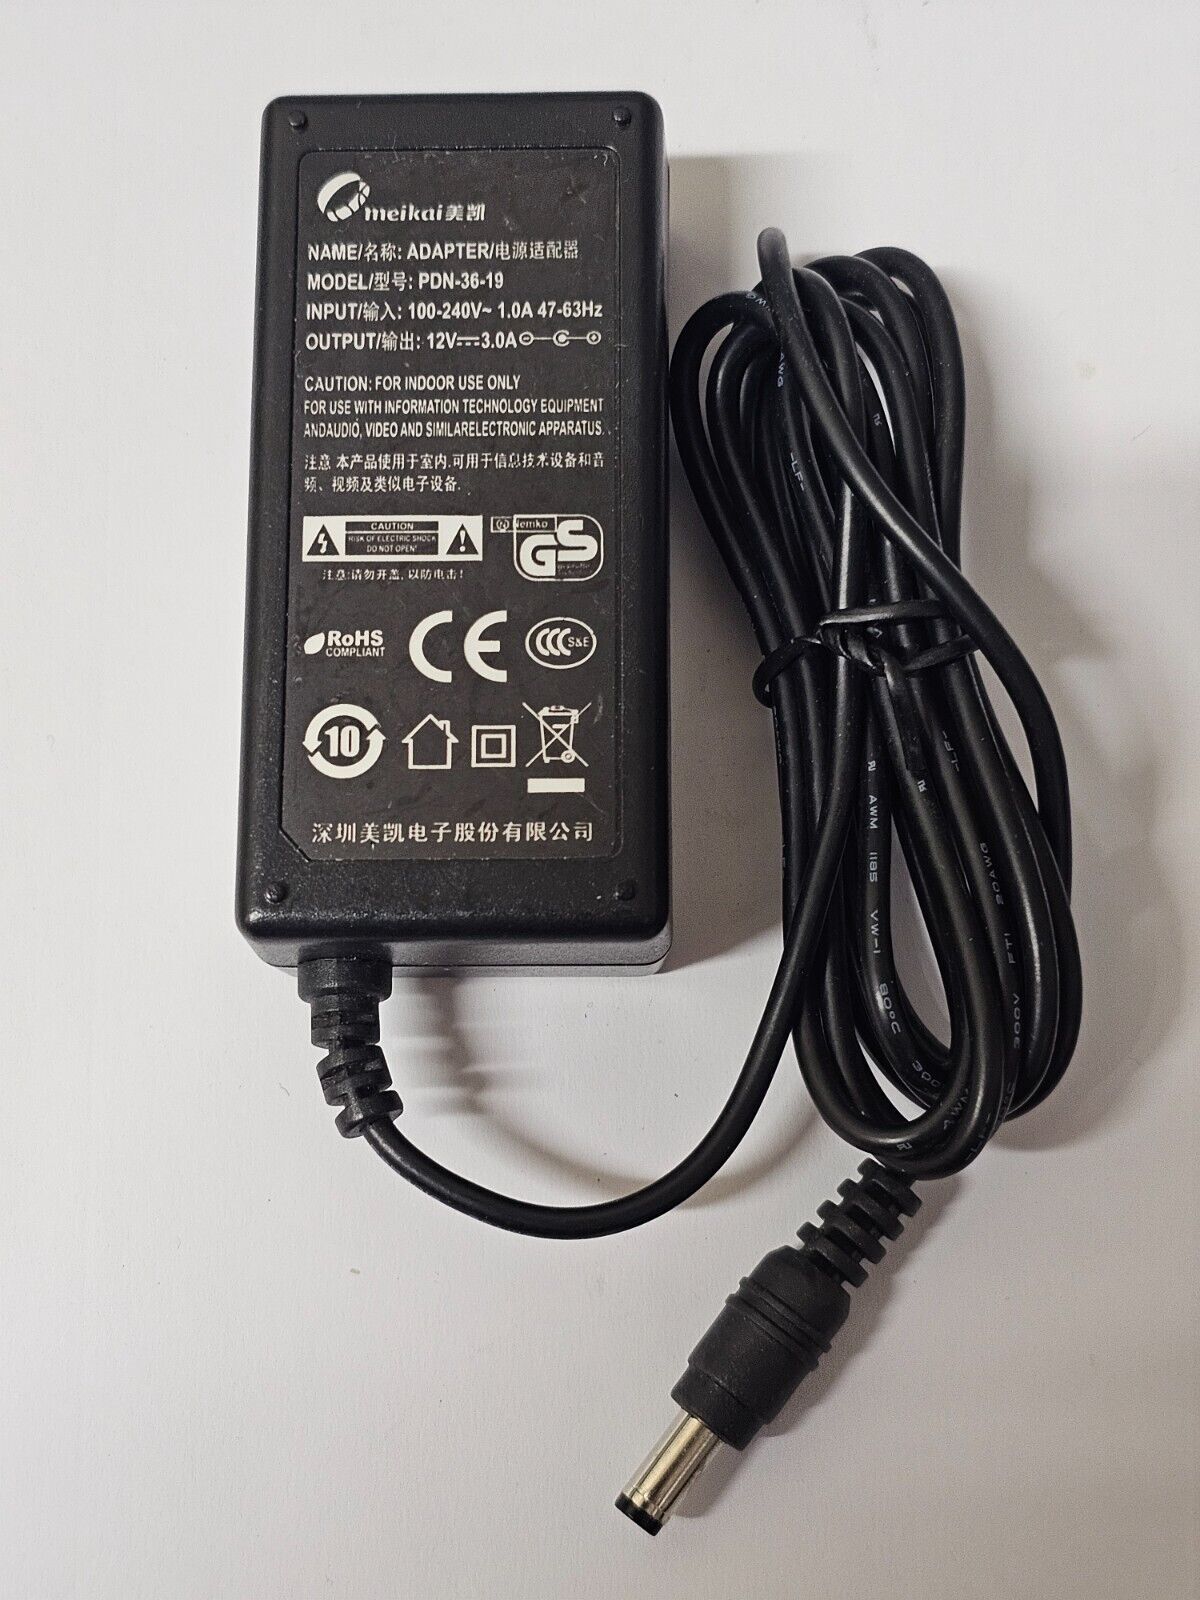 Genuine Meikai 12V 3.0A 36W 5.5mm x 2.1mm AC Power Adapter Charger PDN-36-19 Compatible Brand Universal Type Power Adap - Click Image to Close